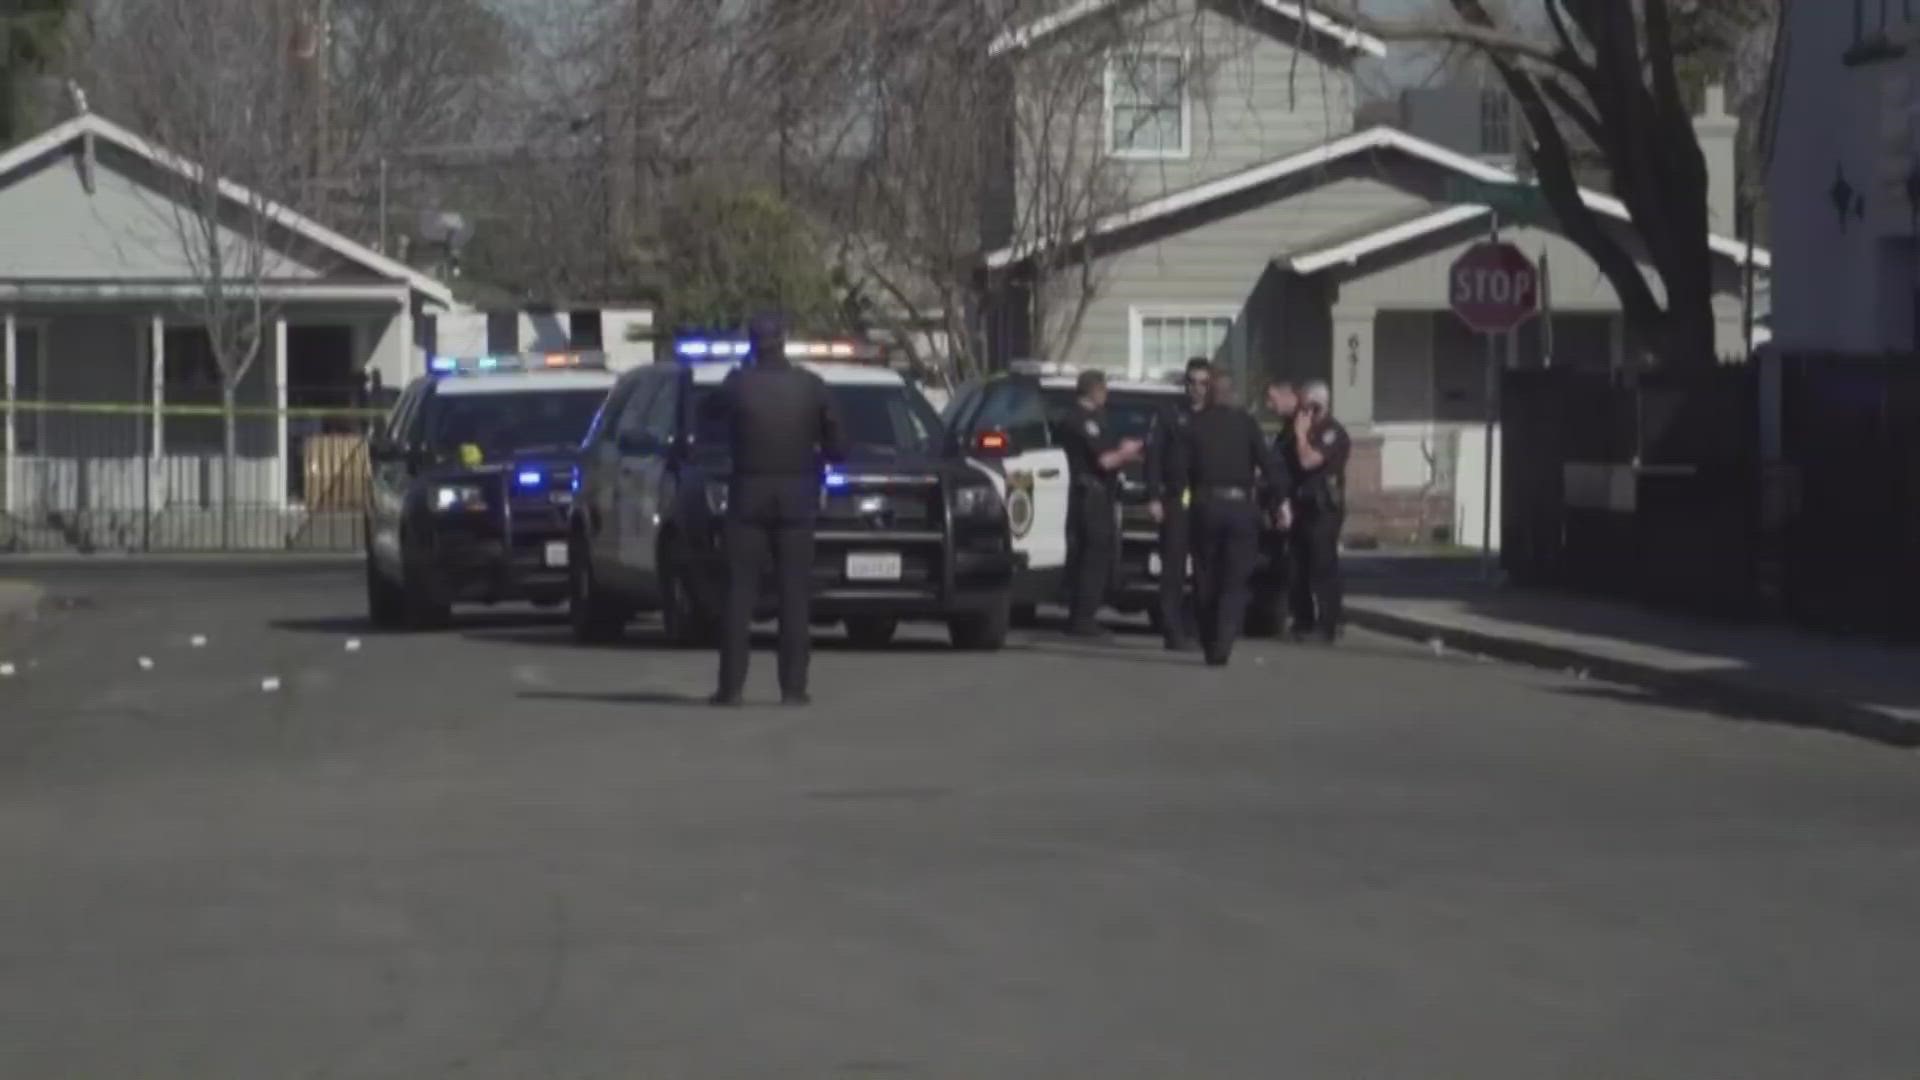 The shooting happened near El Camino Ave and Cantalier Street, according to the Sacramento Police Department.